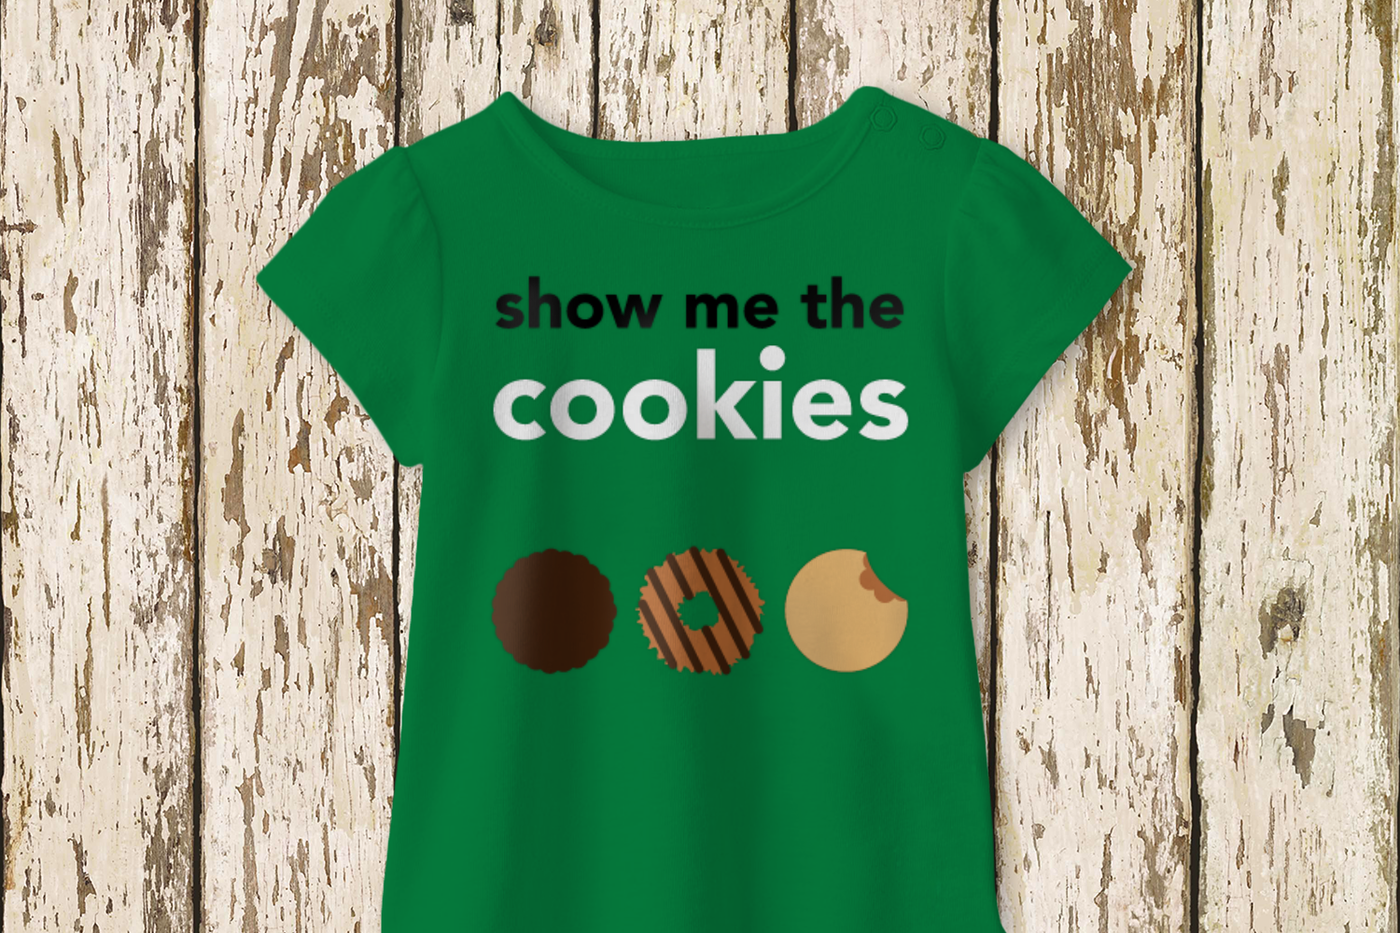 Show me the cookies design